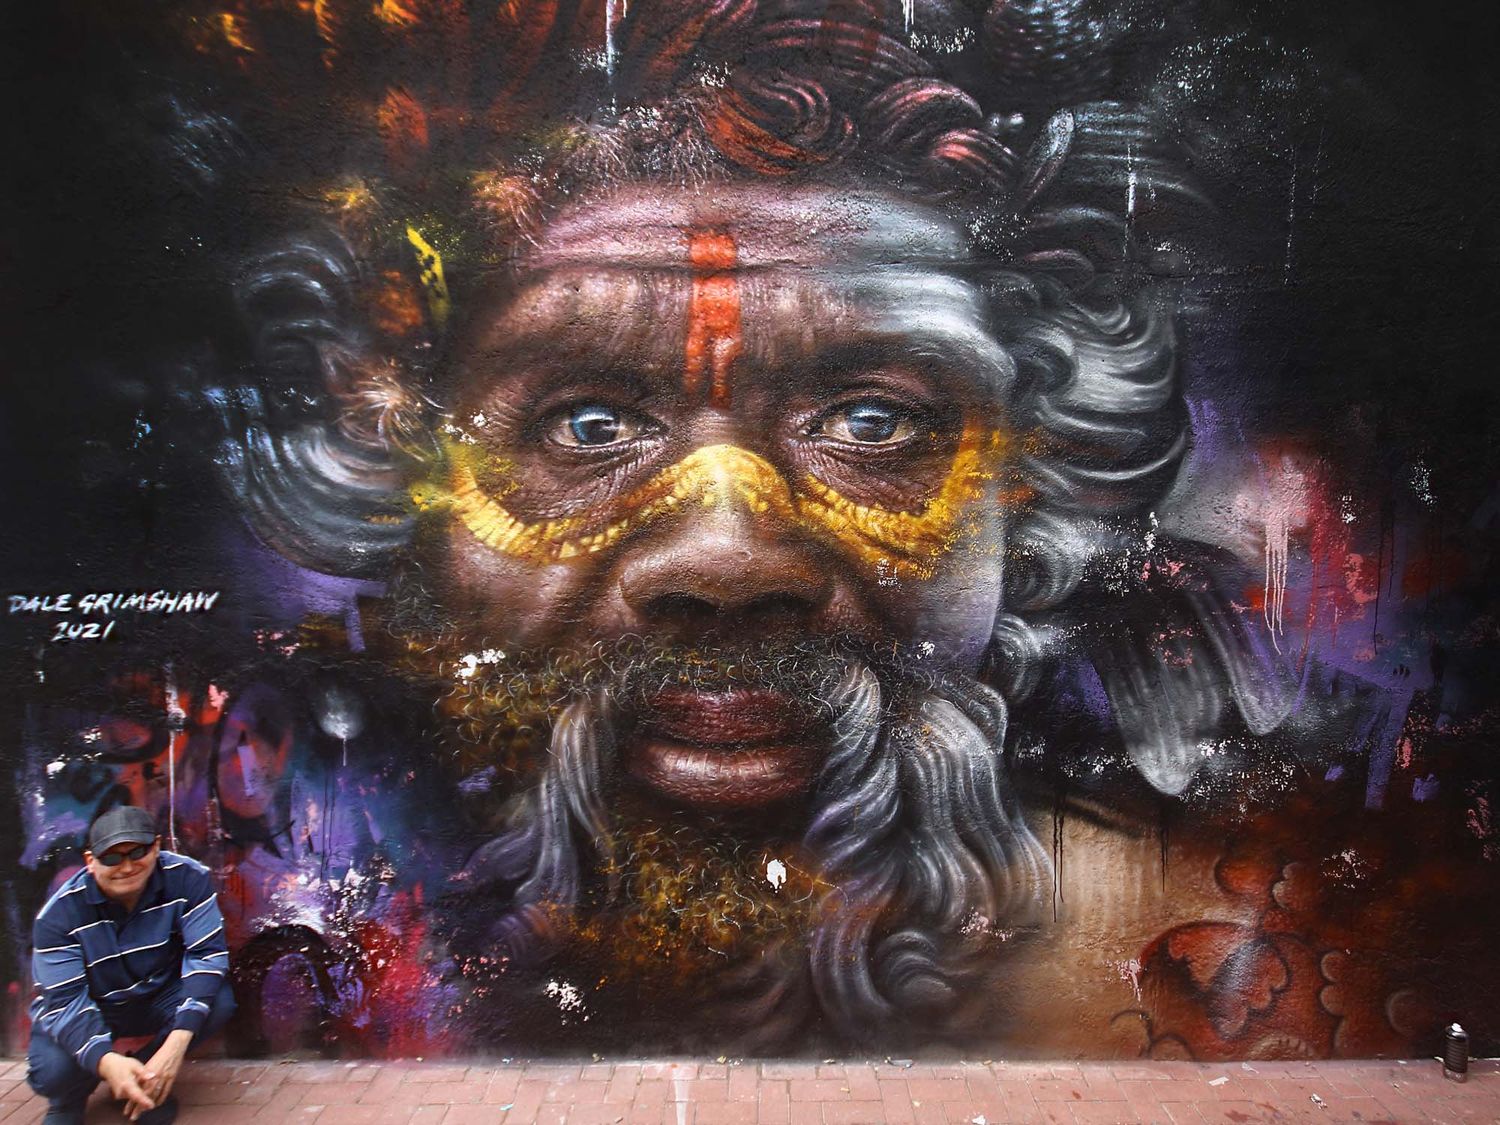 The artist Dale Grimshaw is known for having devoted his work to painting African tribal communities, strongly inspired by his humanitarian beliefs (©Murcia Street Art Project).